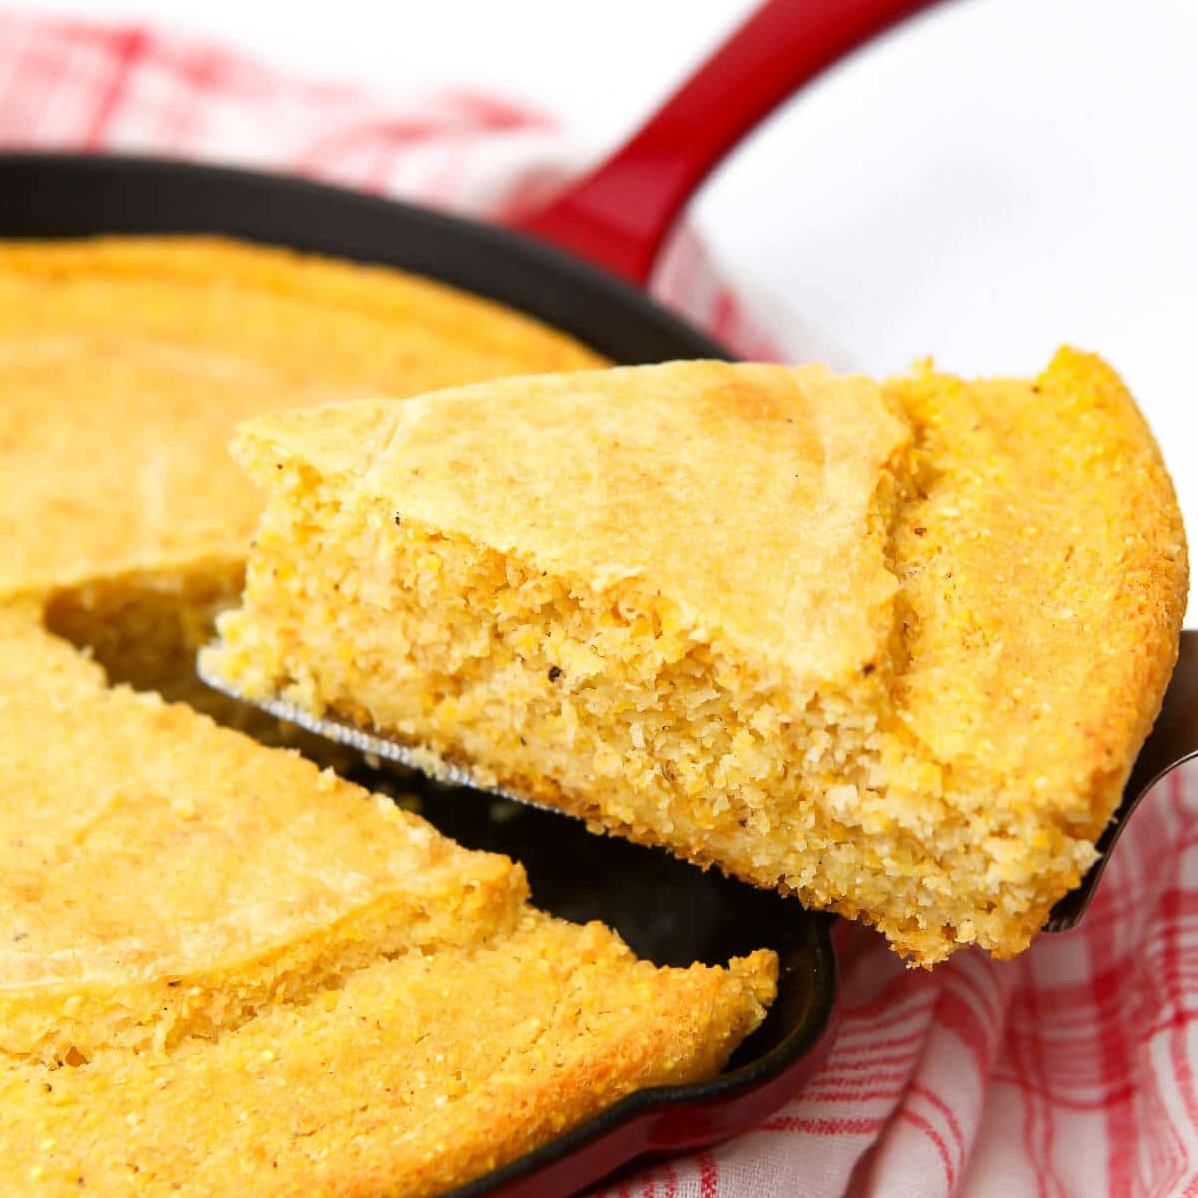  The perfect crumbly texture of this cornbread will win your heart over in a heartbeat.